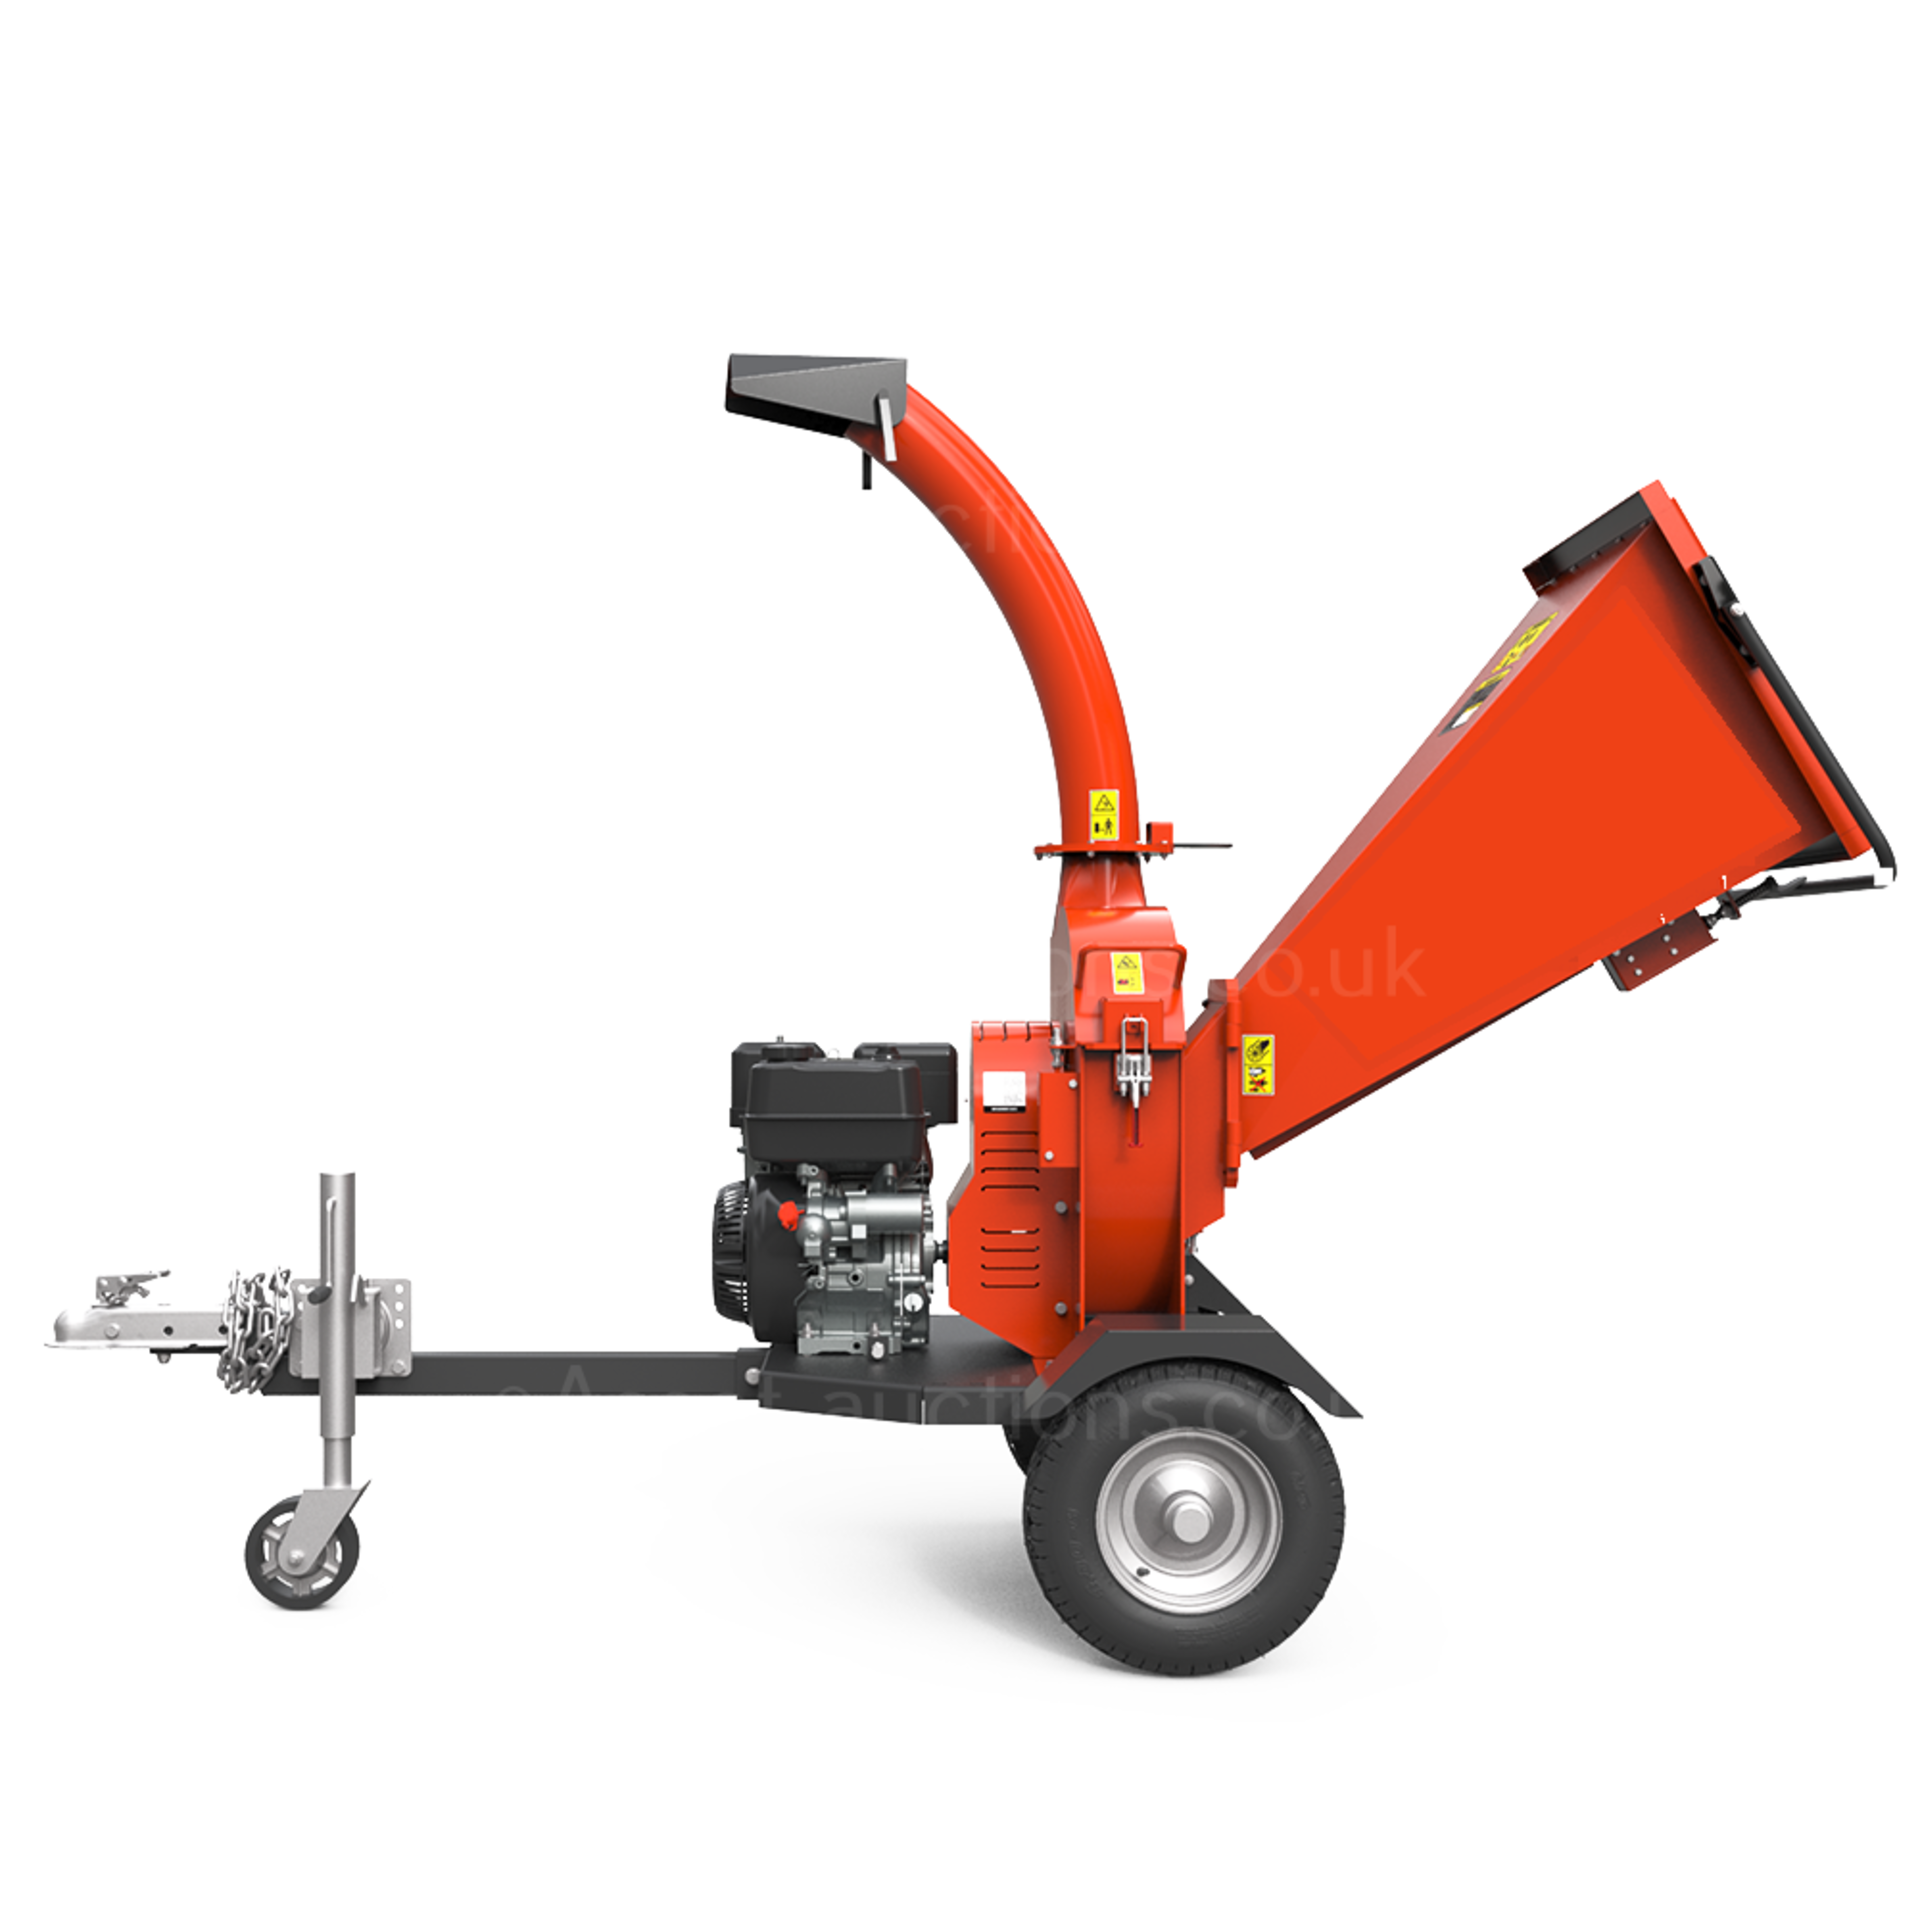 BRAND NEW AND UNUSED DGS1500 420CC 4.5” TOWABLE PETROL WOOD CHIPPER *PLUS VAT* - Image 7 of 11